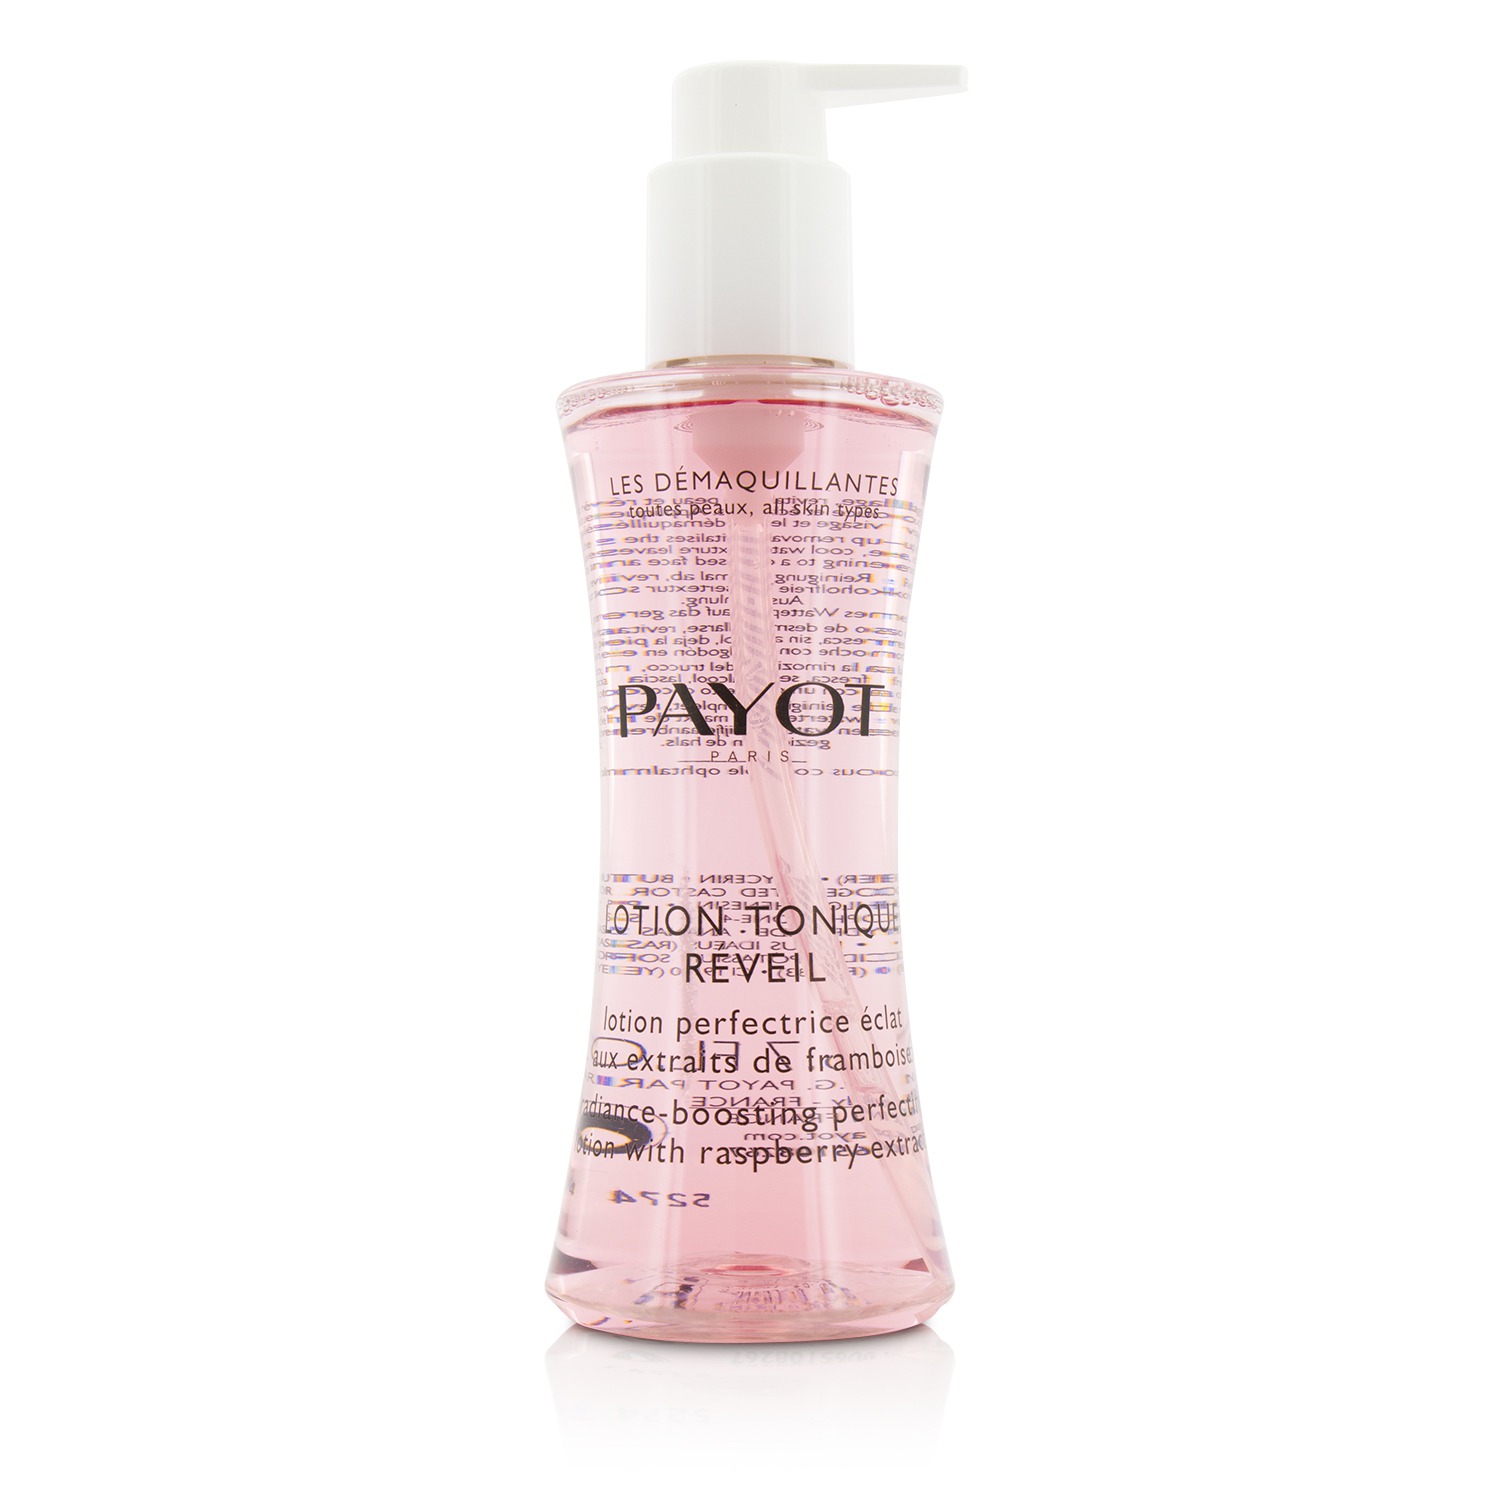 Les Demaquillantes Lotion Tonique Reveil Radiance-Boosting Perfecting Lotion Payot Image